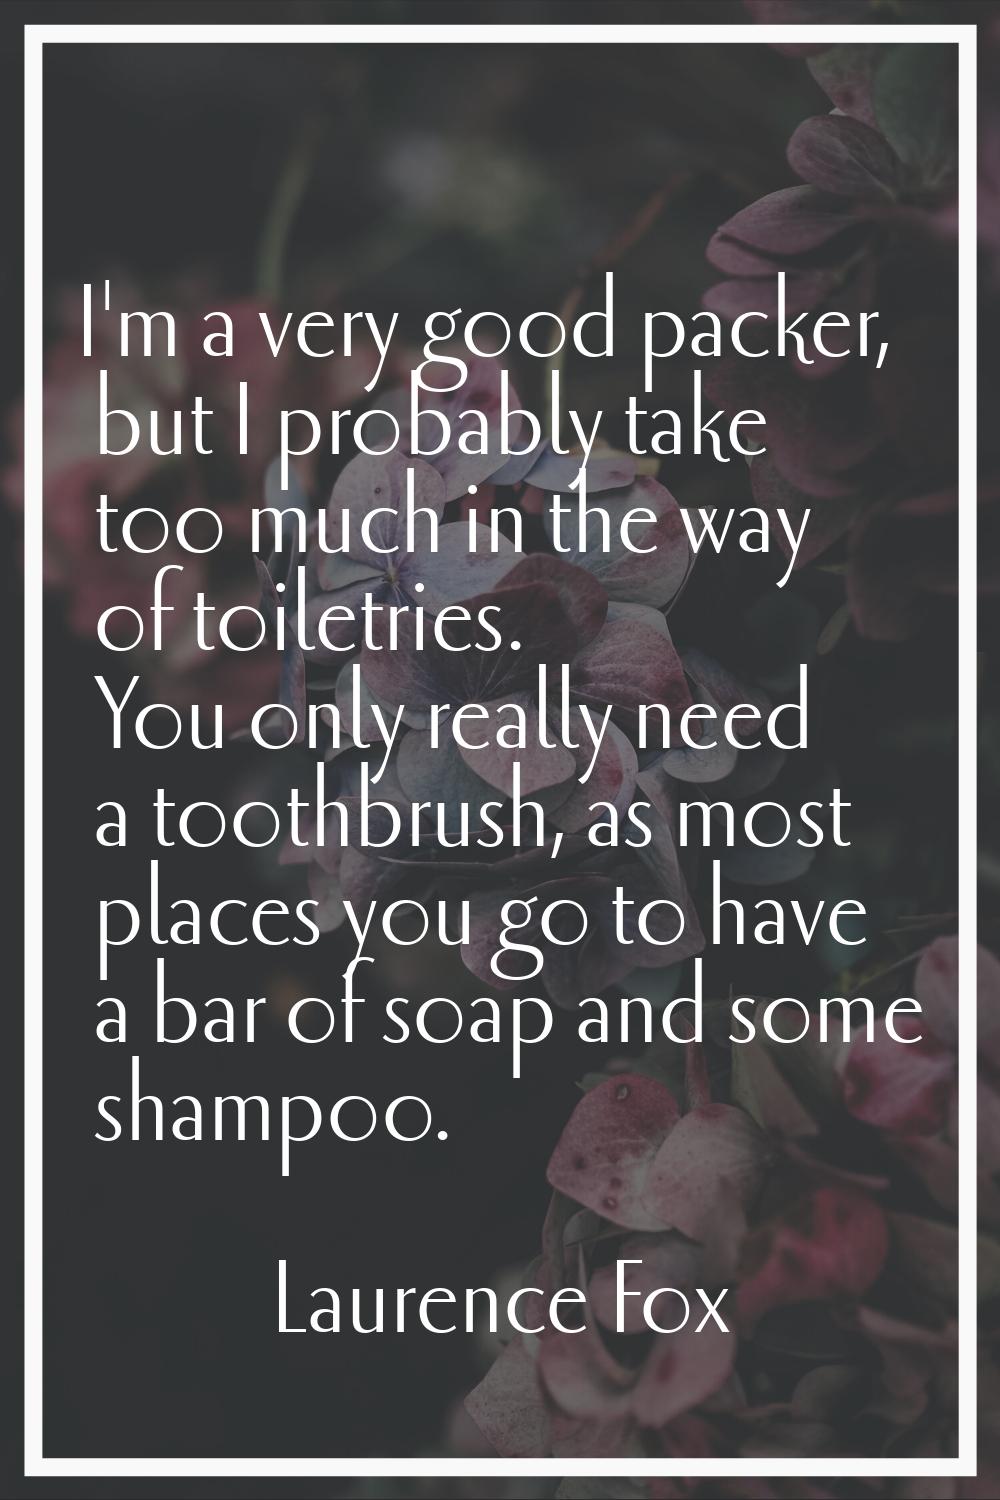 I'm a very good packer, but I probably take too much in the way of toiletries. You only really need